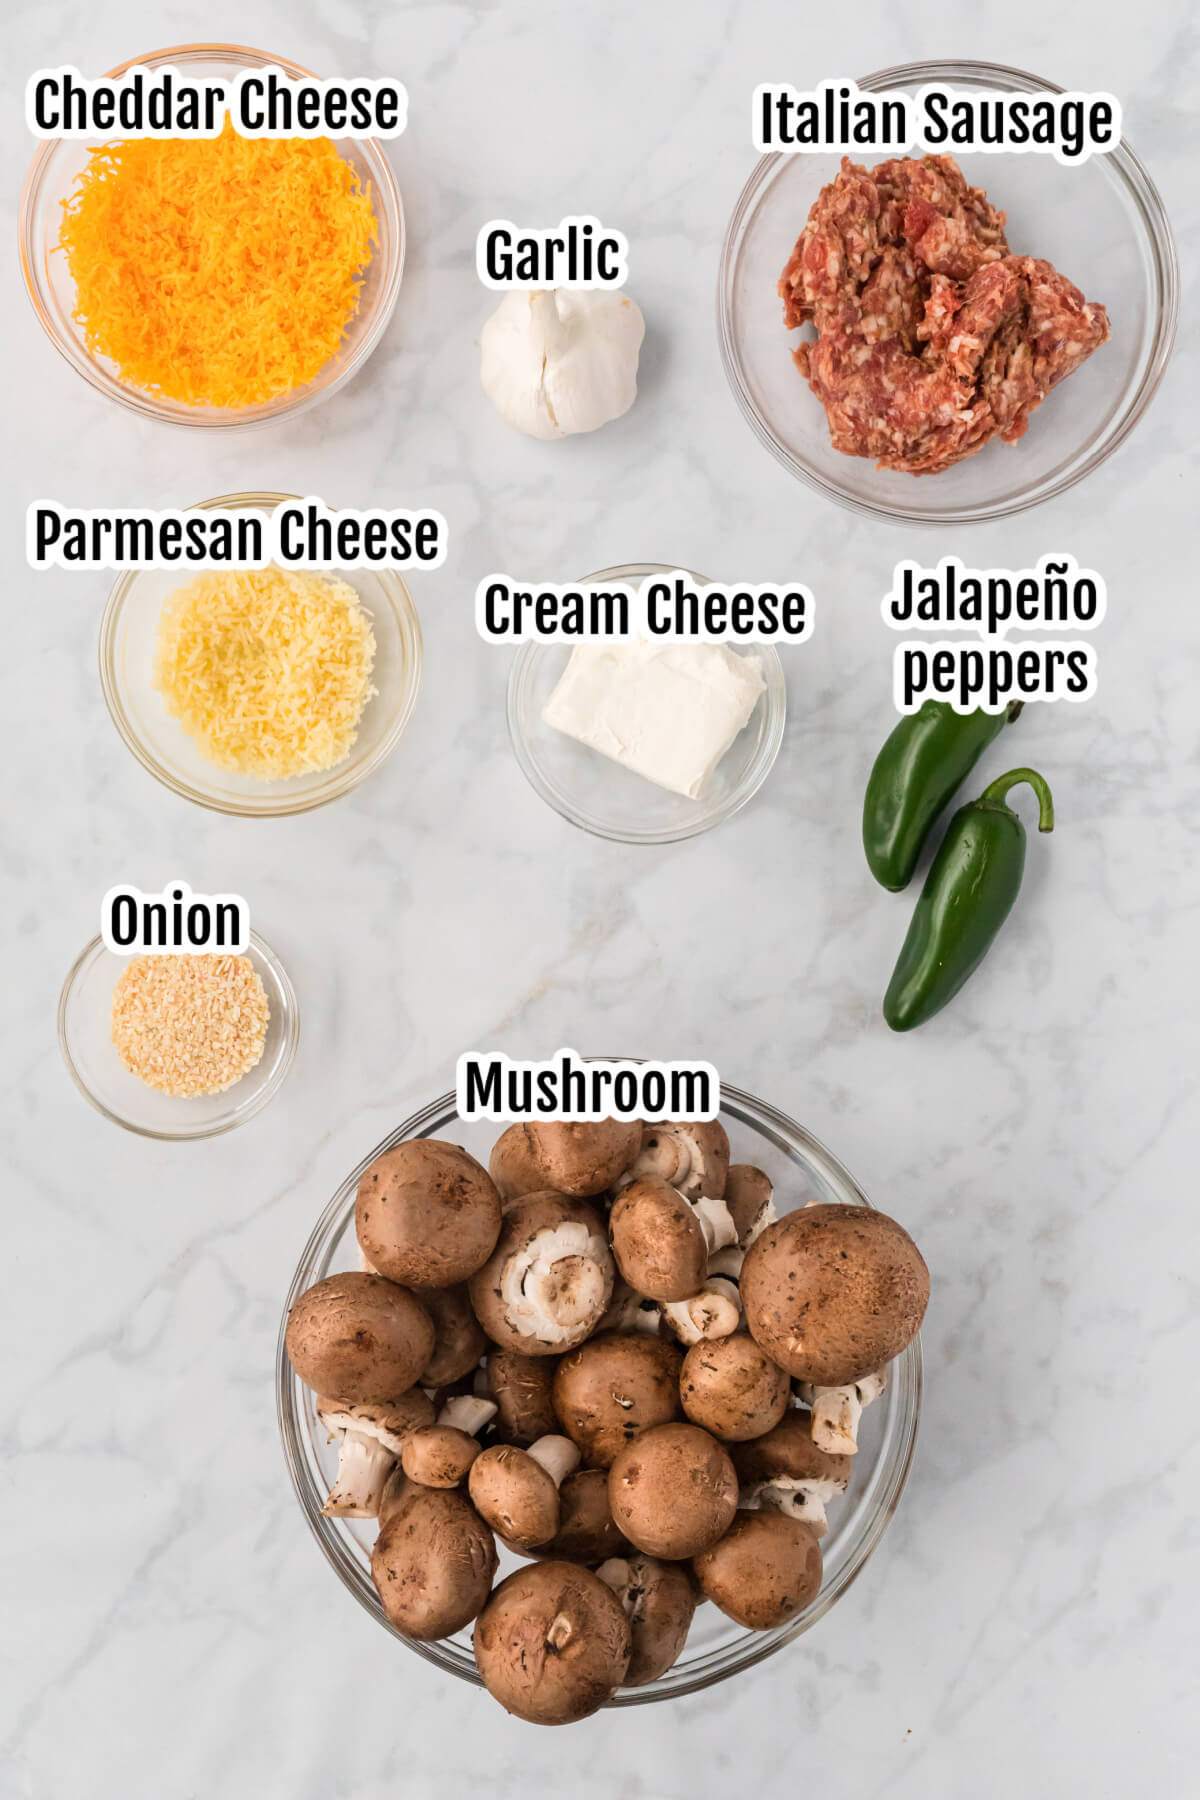 Image of the ingredients for Sausage stuffed mushroom appetizers. 